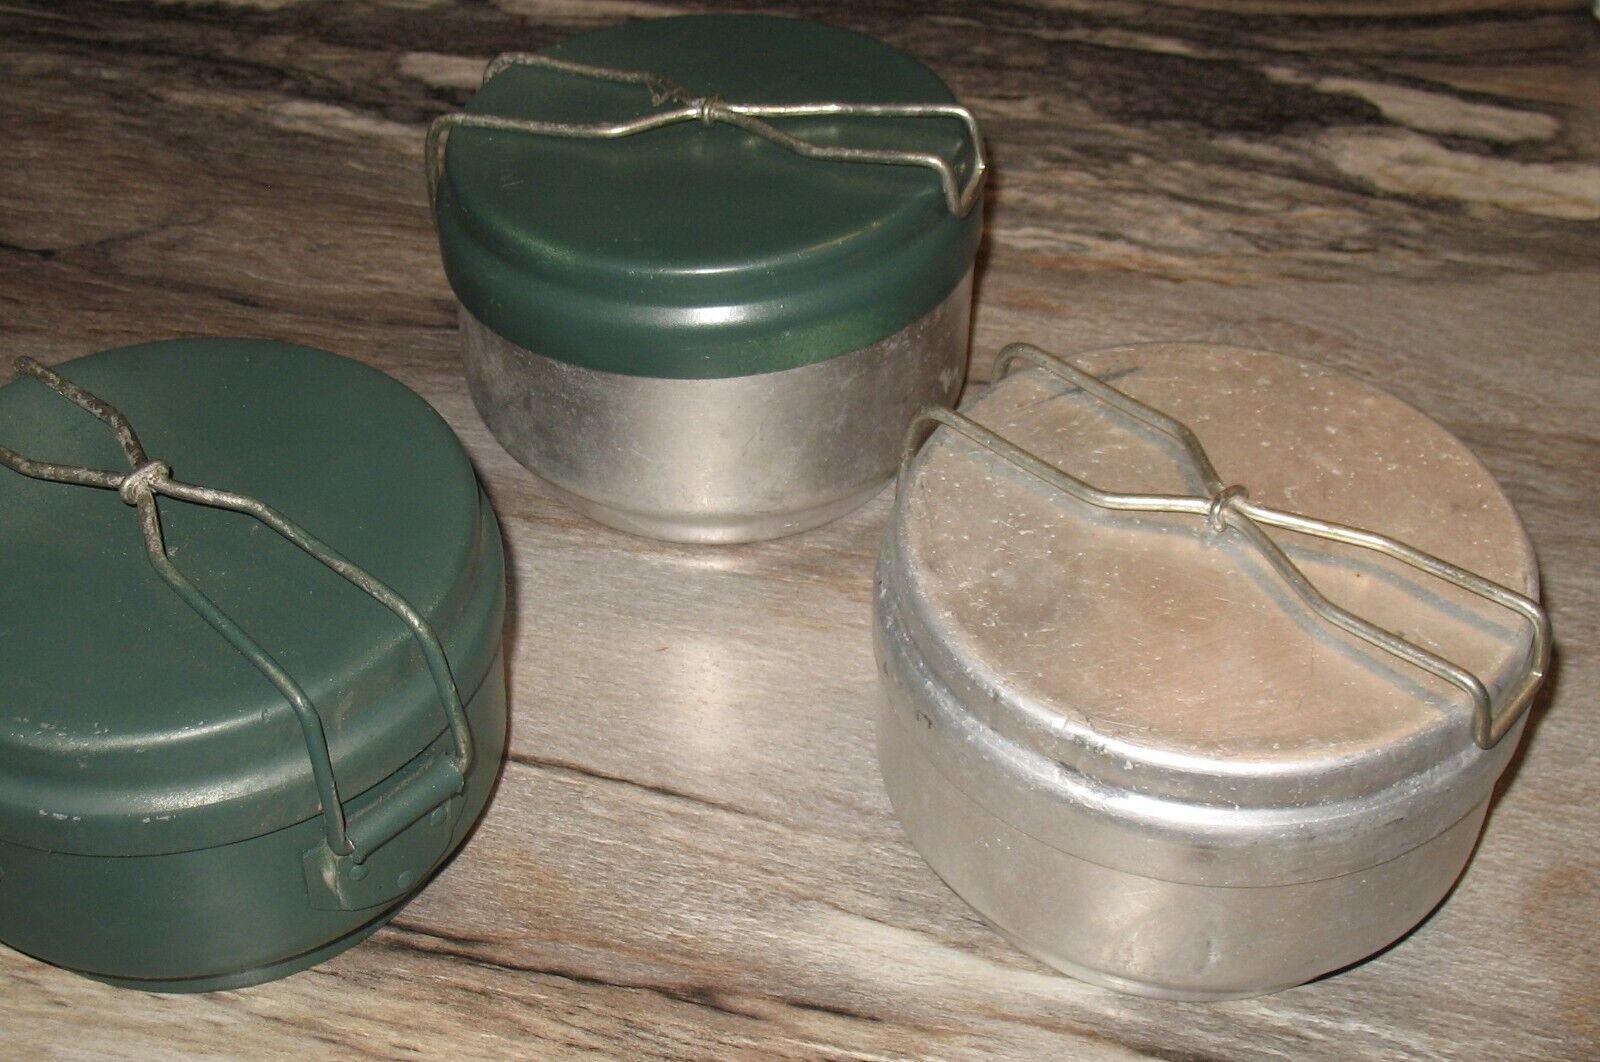 (ONE) 3 PC.CZECH ARMY O.D. ALUMINUM MESS KIT - USED CZECH MILITARY SURPLUS COND.